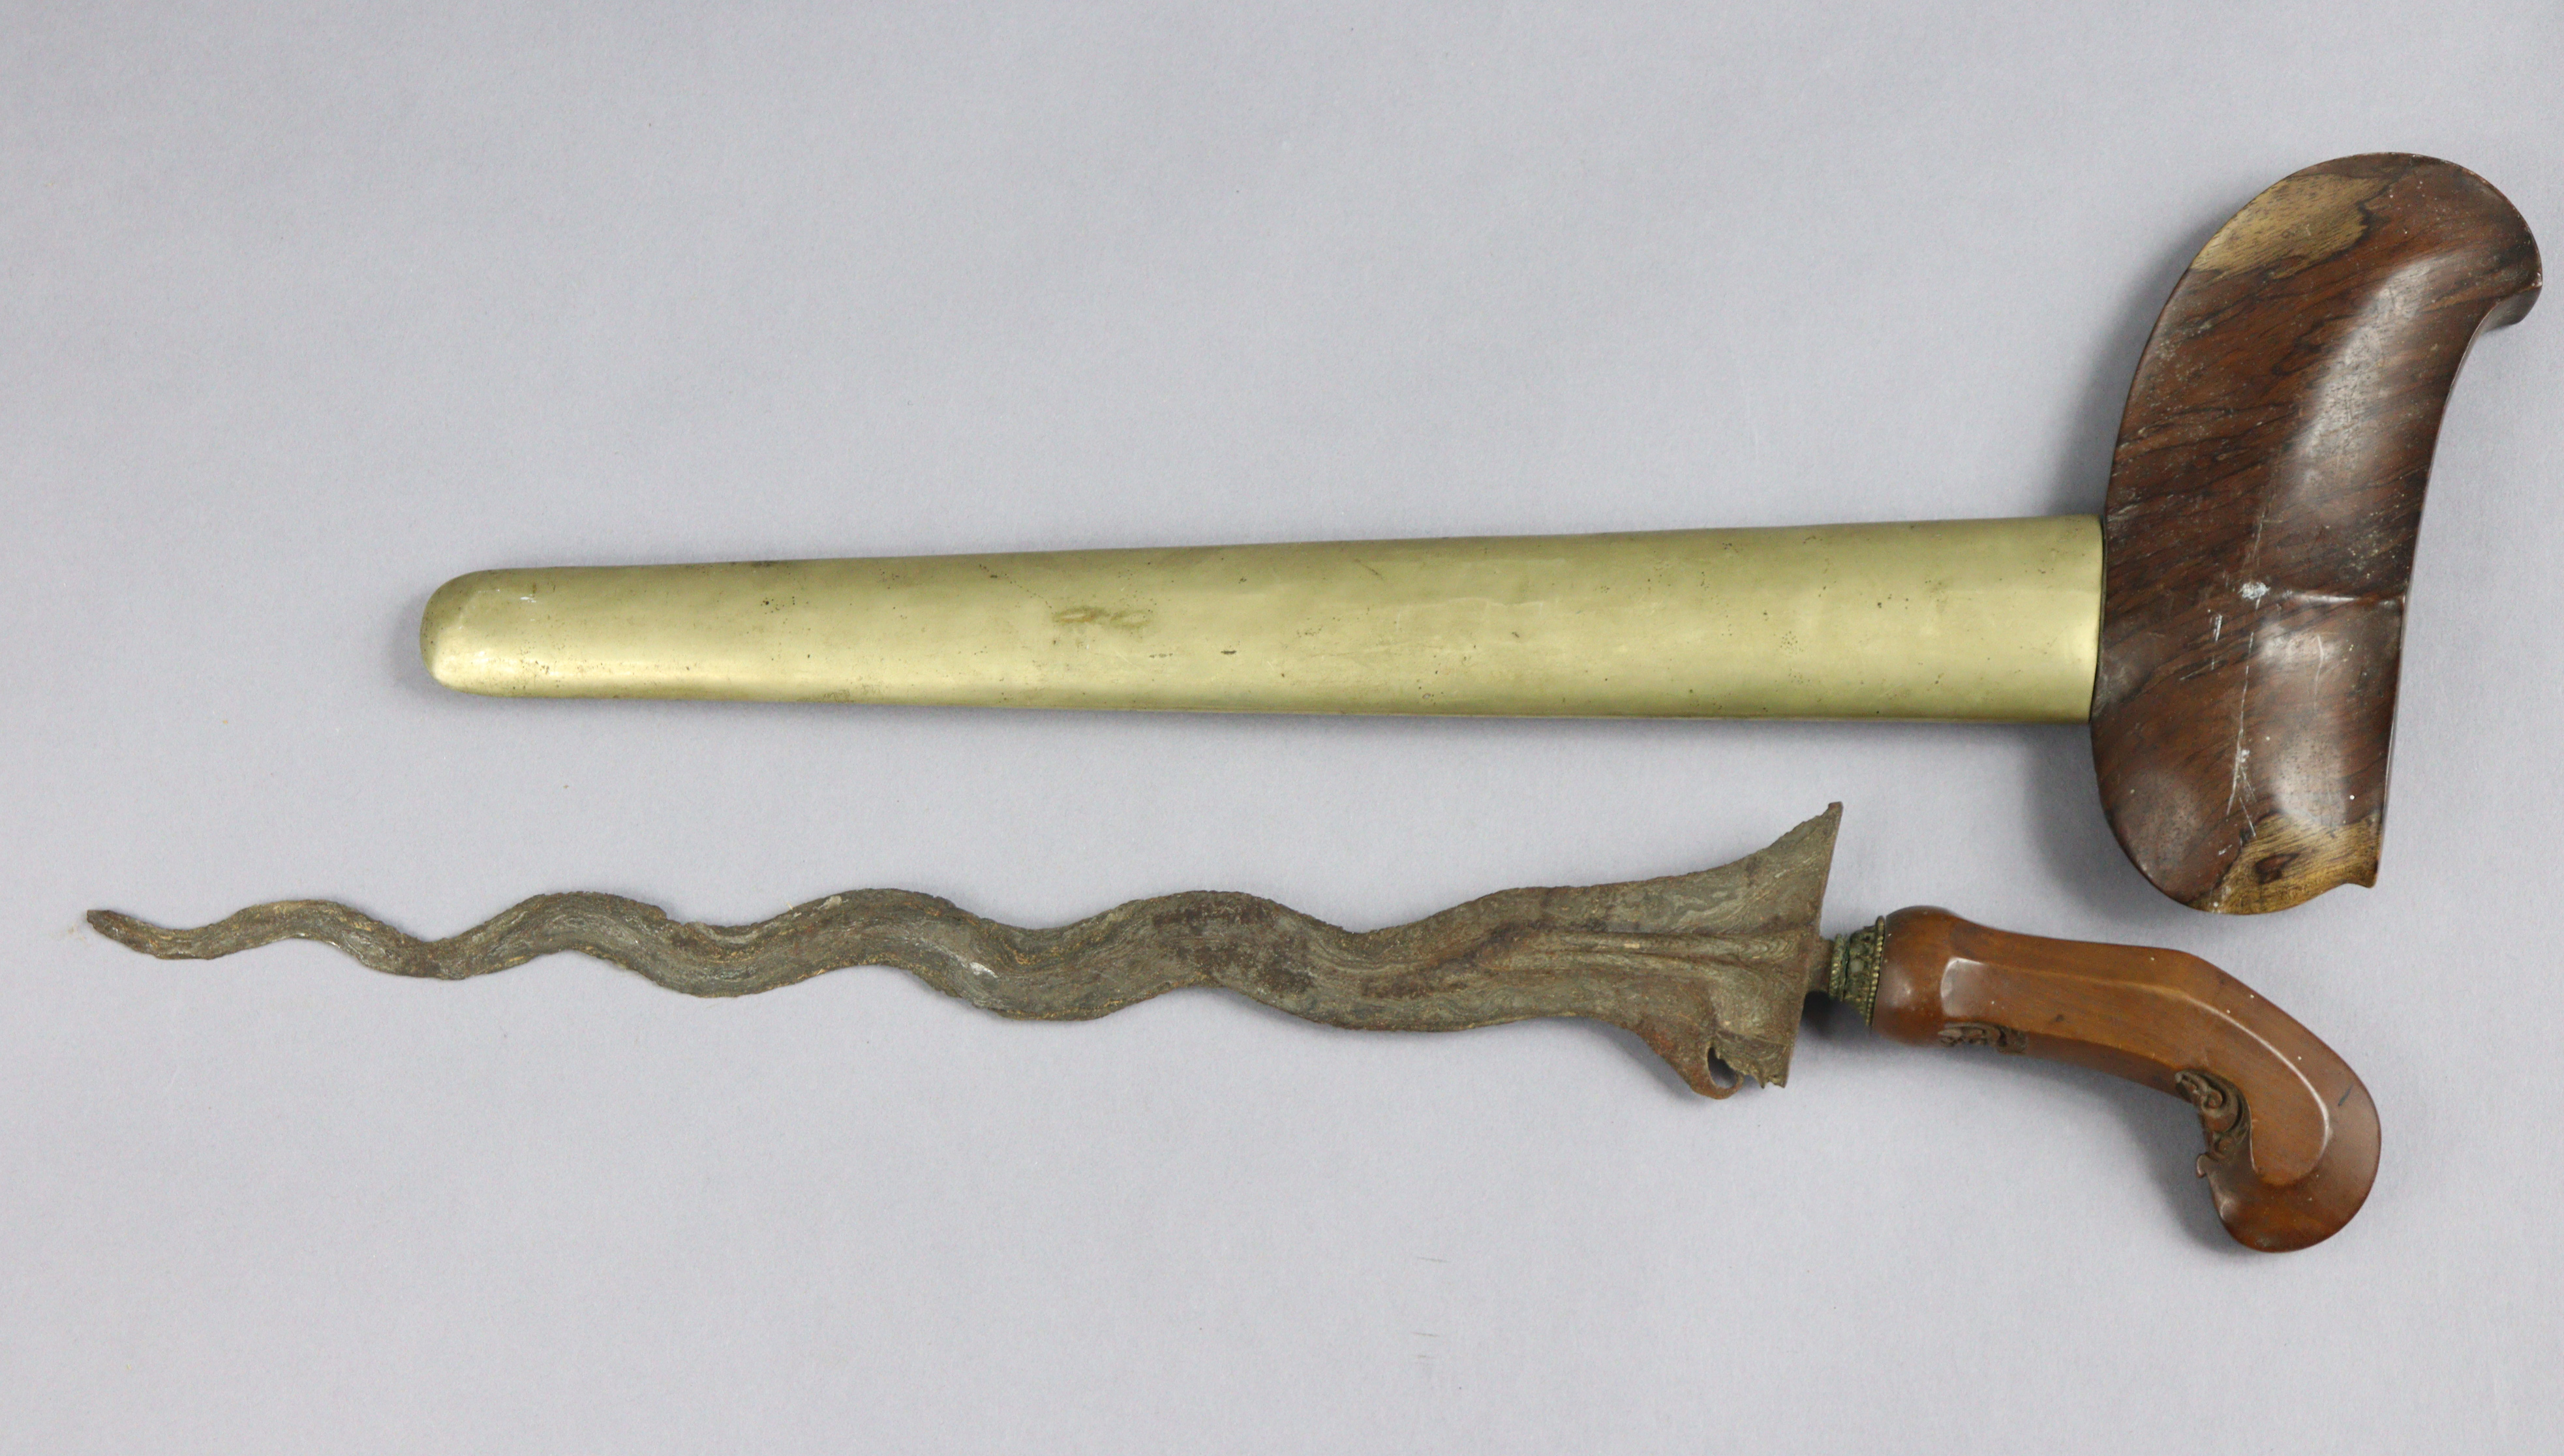 An Indonesian Kris having a 33.5cm long wavy blade, carved wooden grip, & with a metal-covered